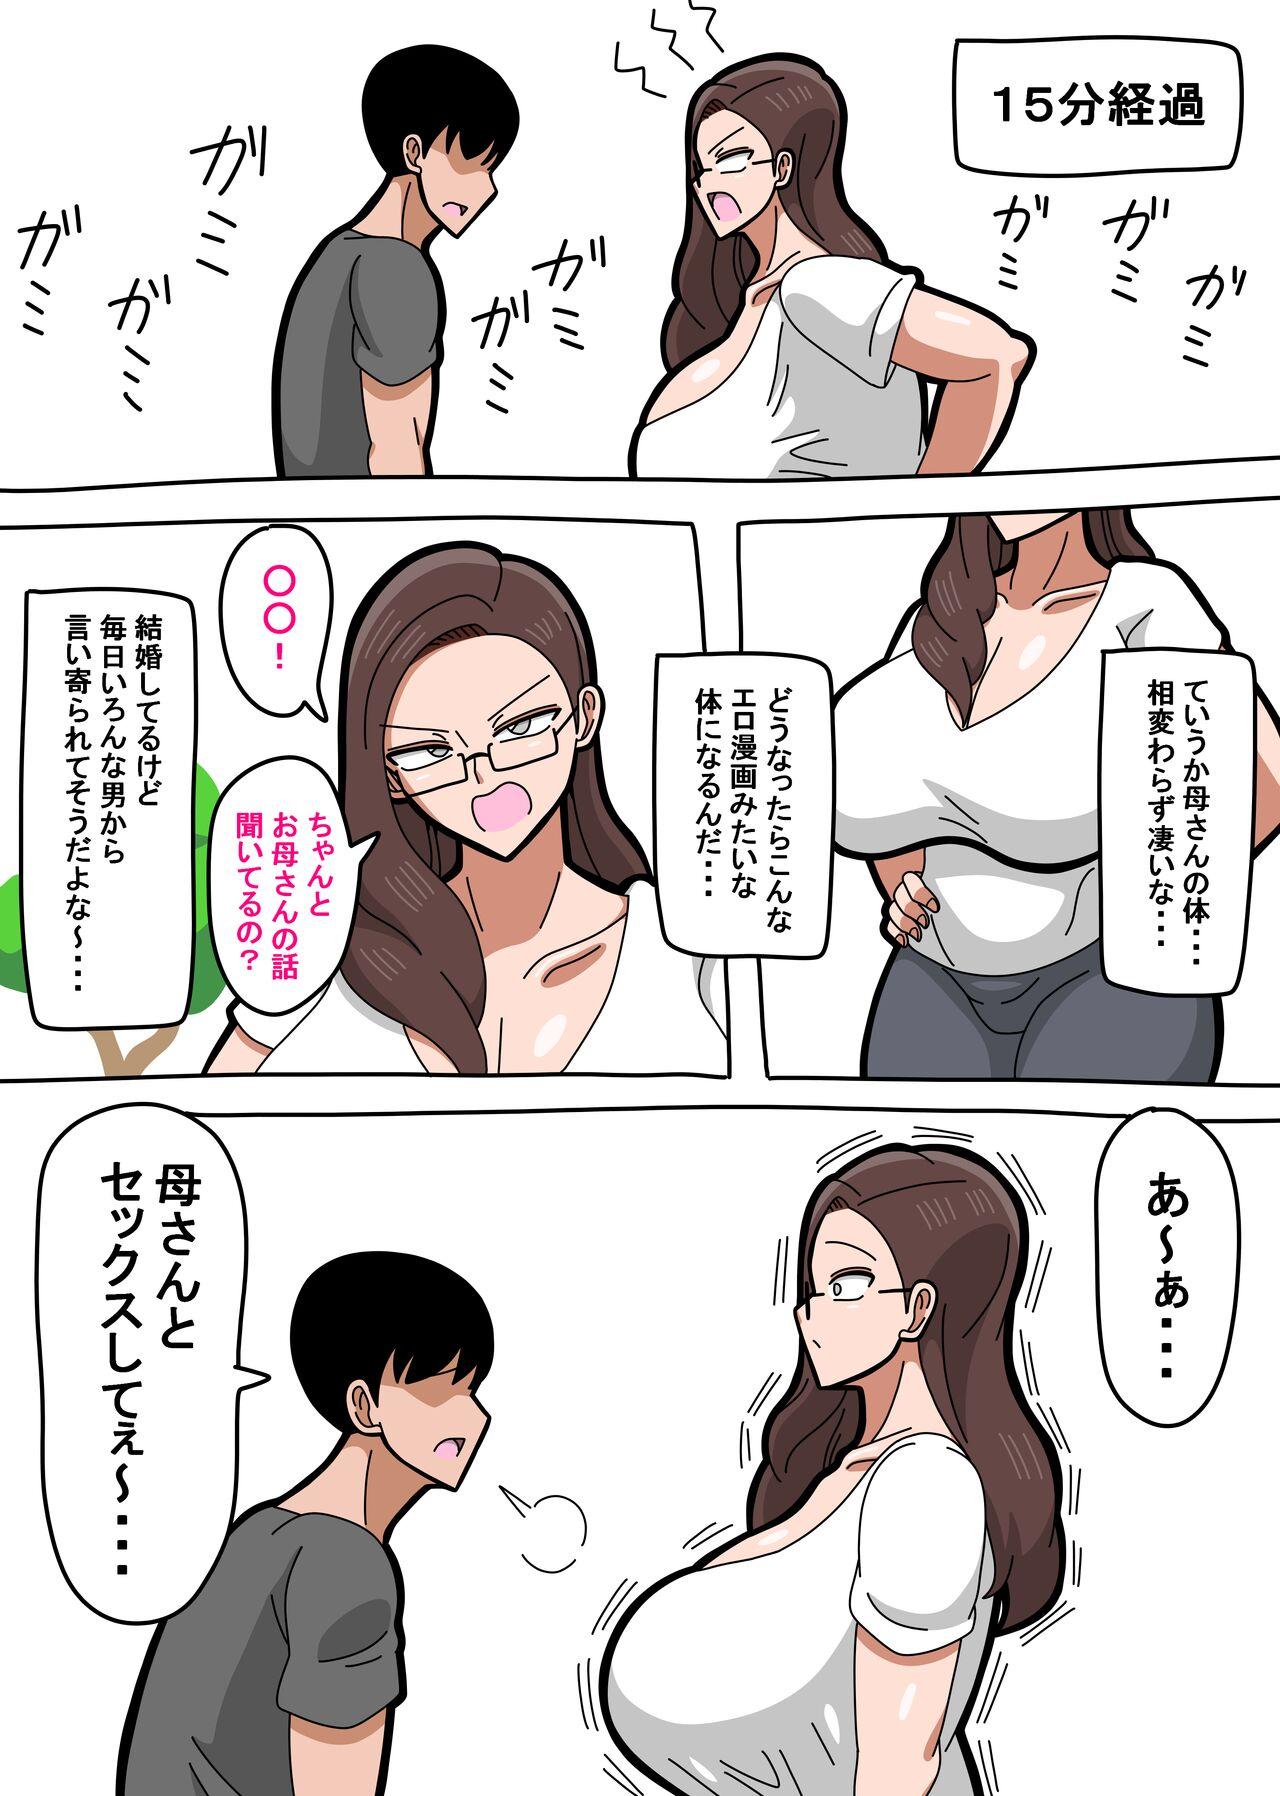 Fetish 母さんは女社長 - Original Reversecowgirl - Page 4